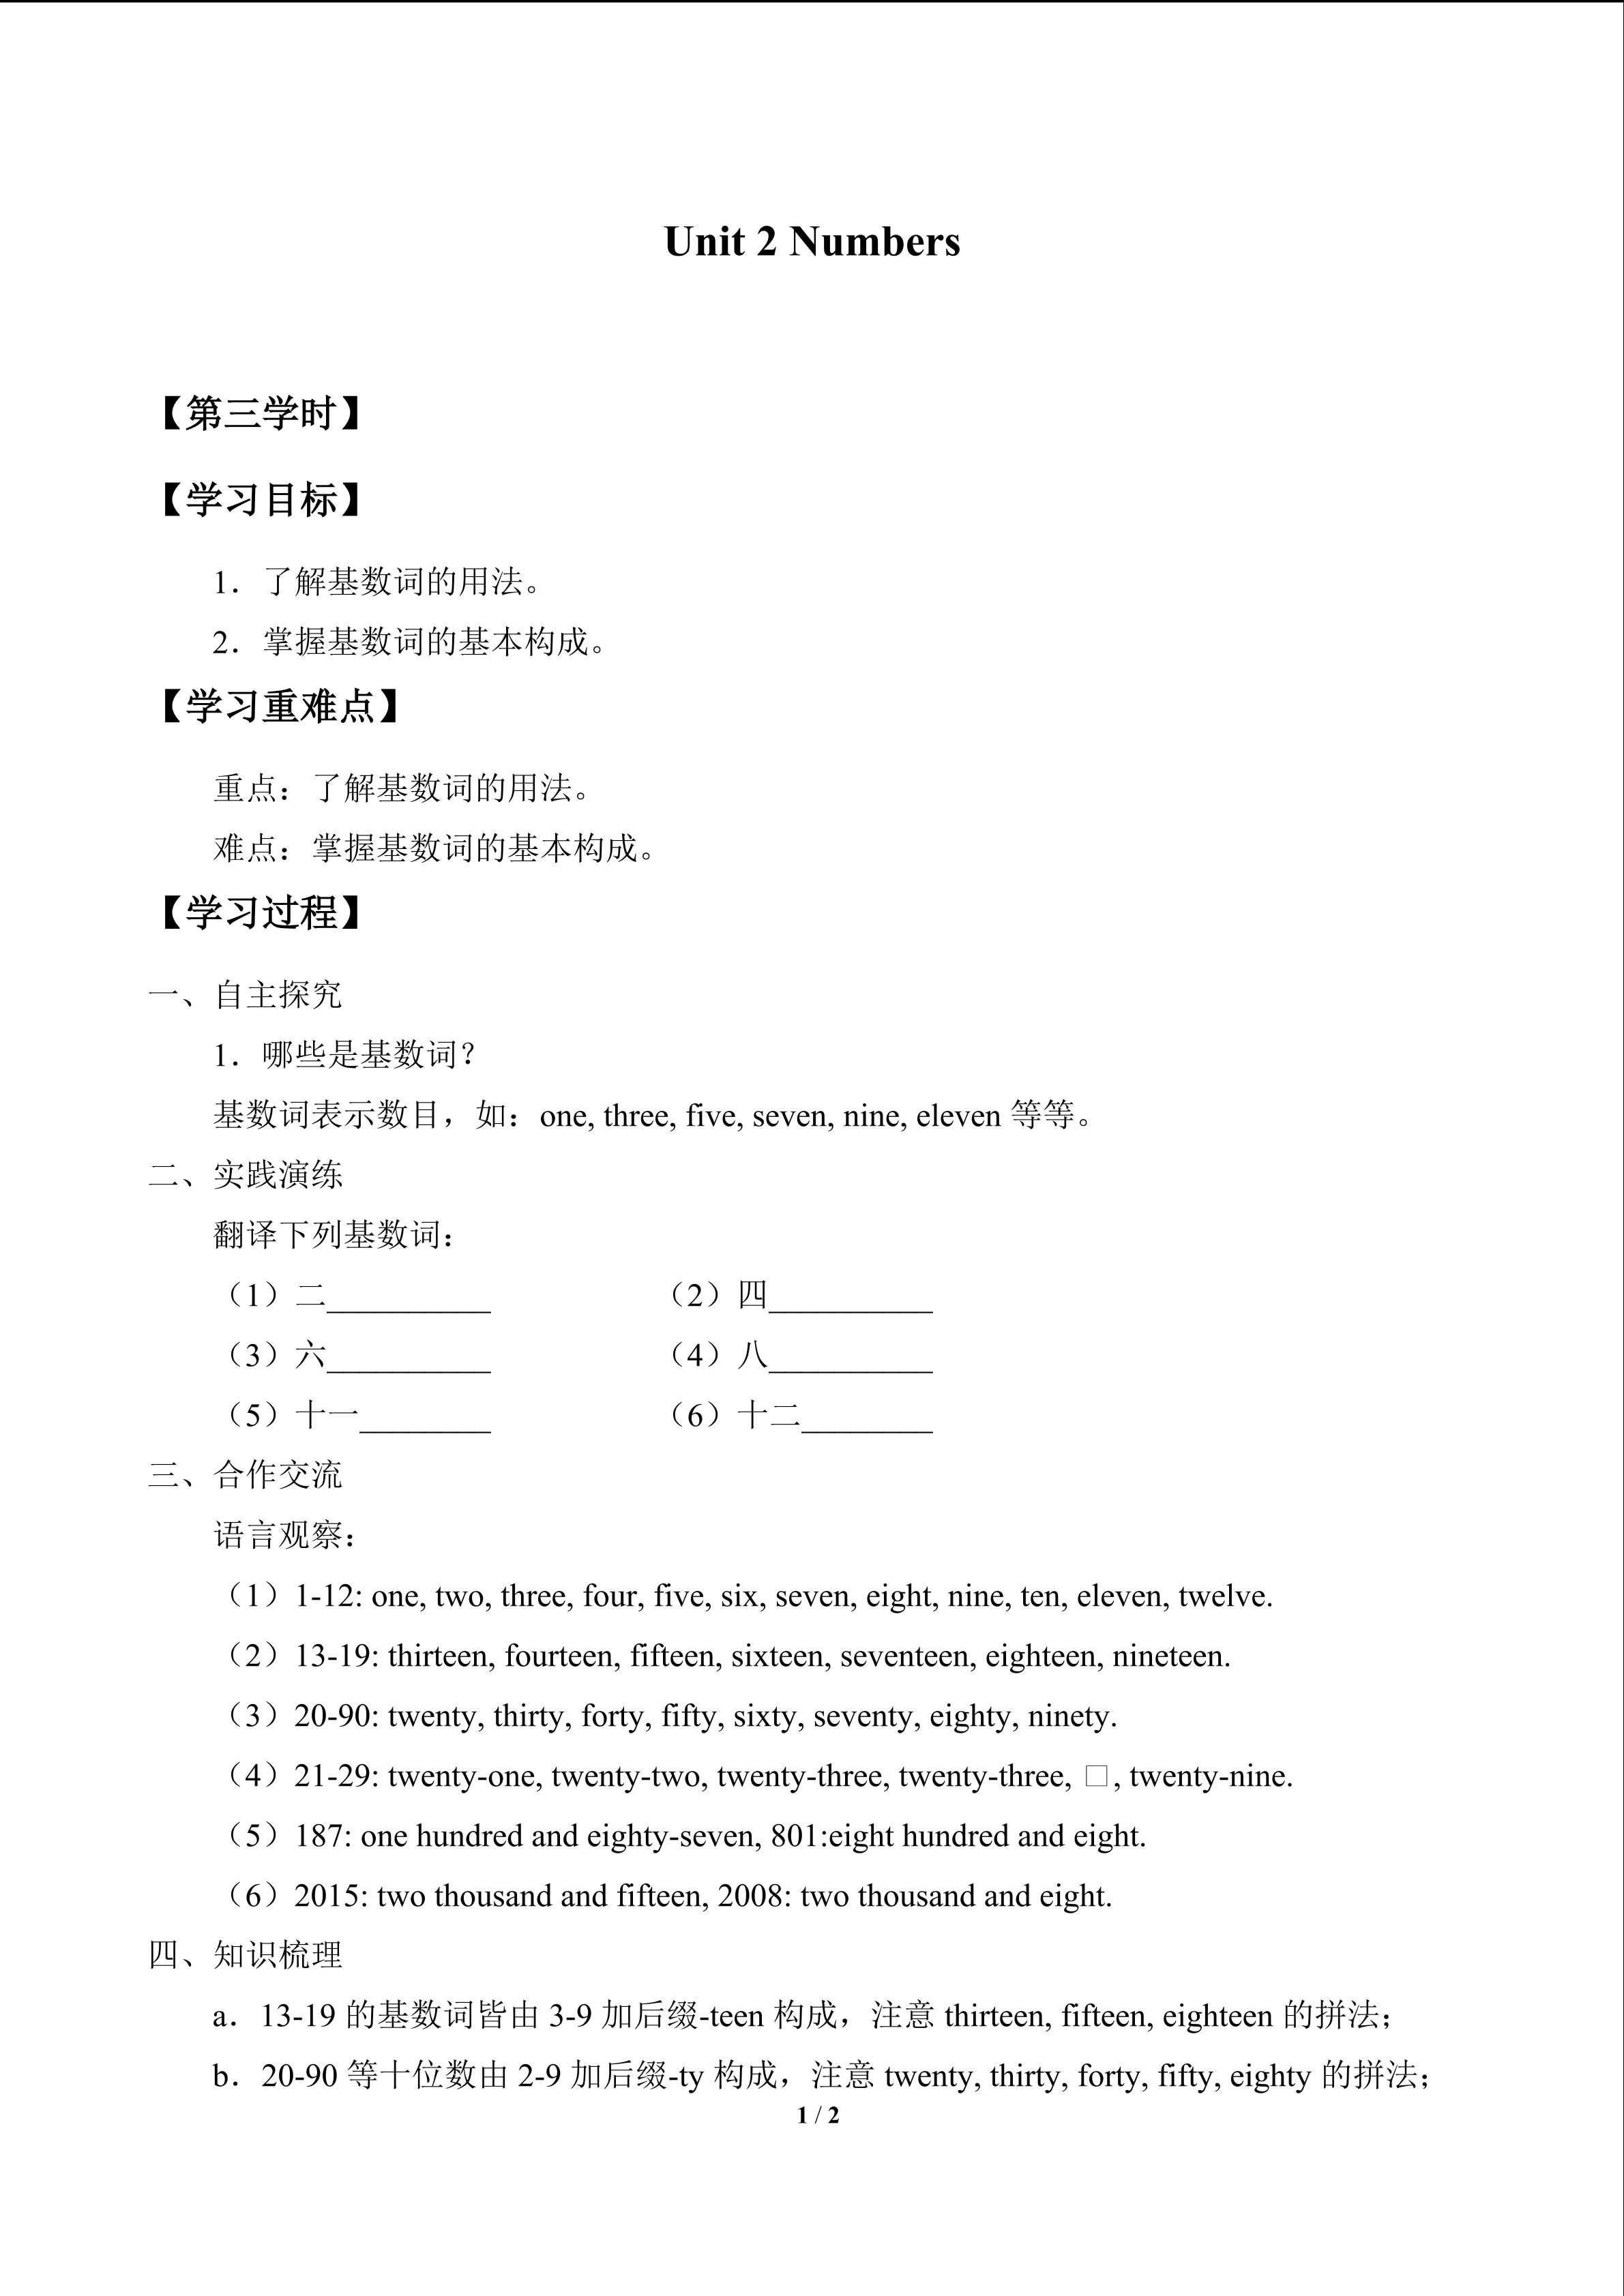 Unit 2  Numbers_学案3